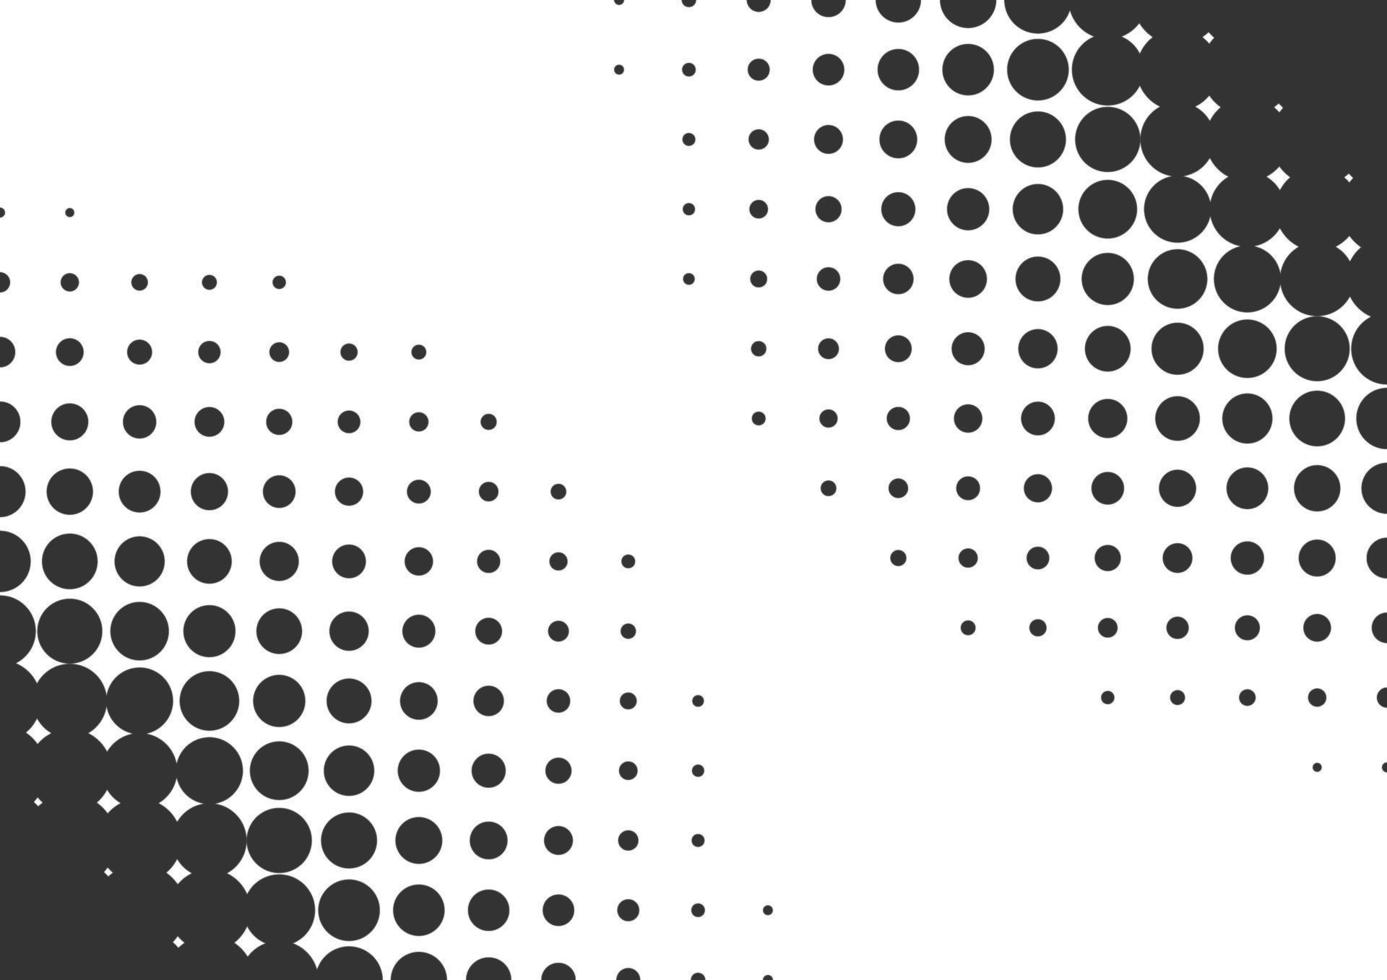 Abstract black and white dots halftone background vector